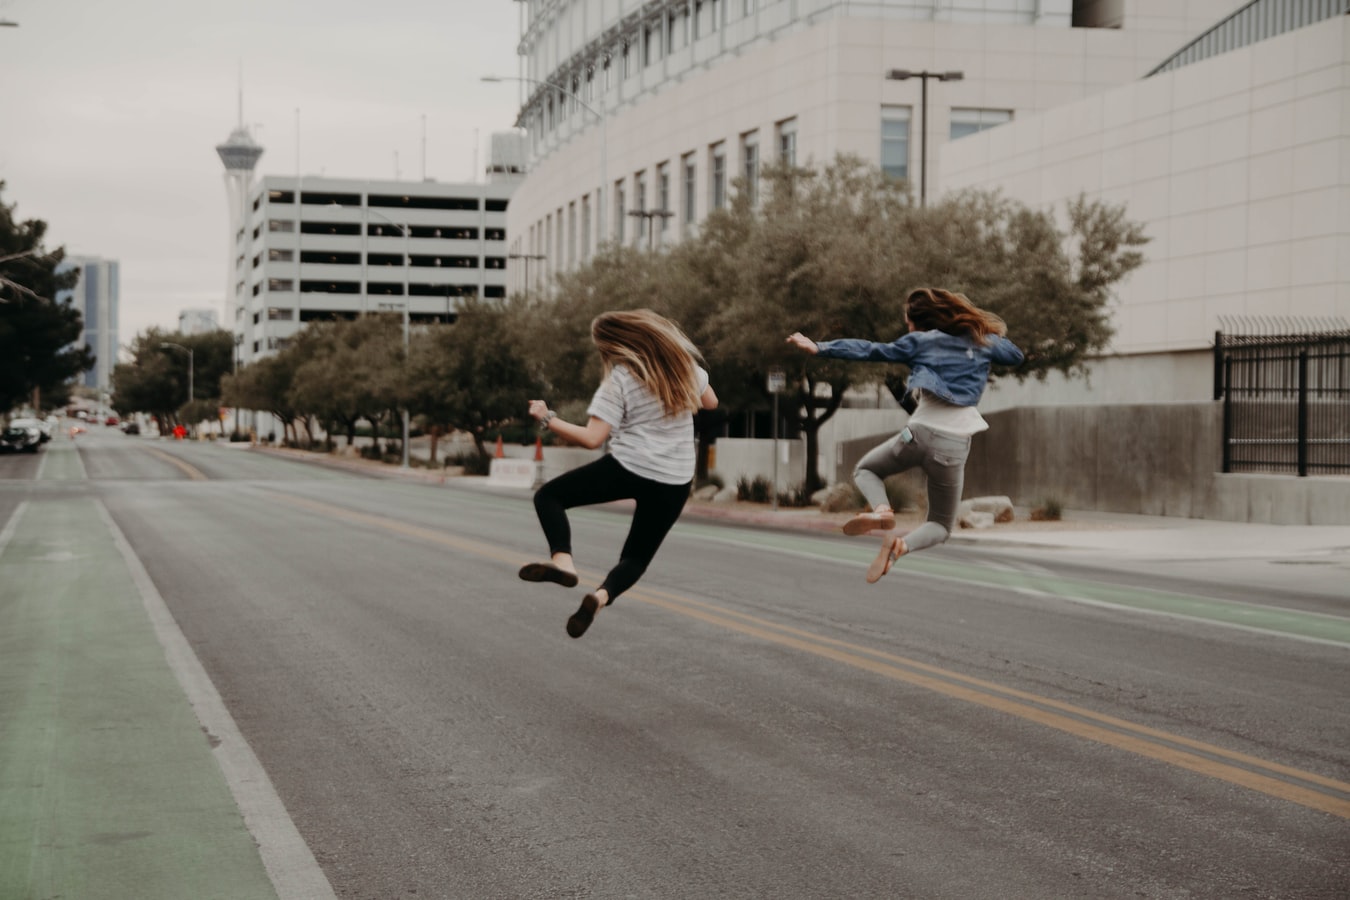 Two influencers jumping side by side in a city street.